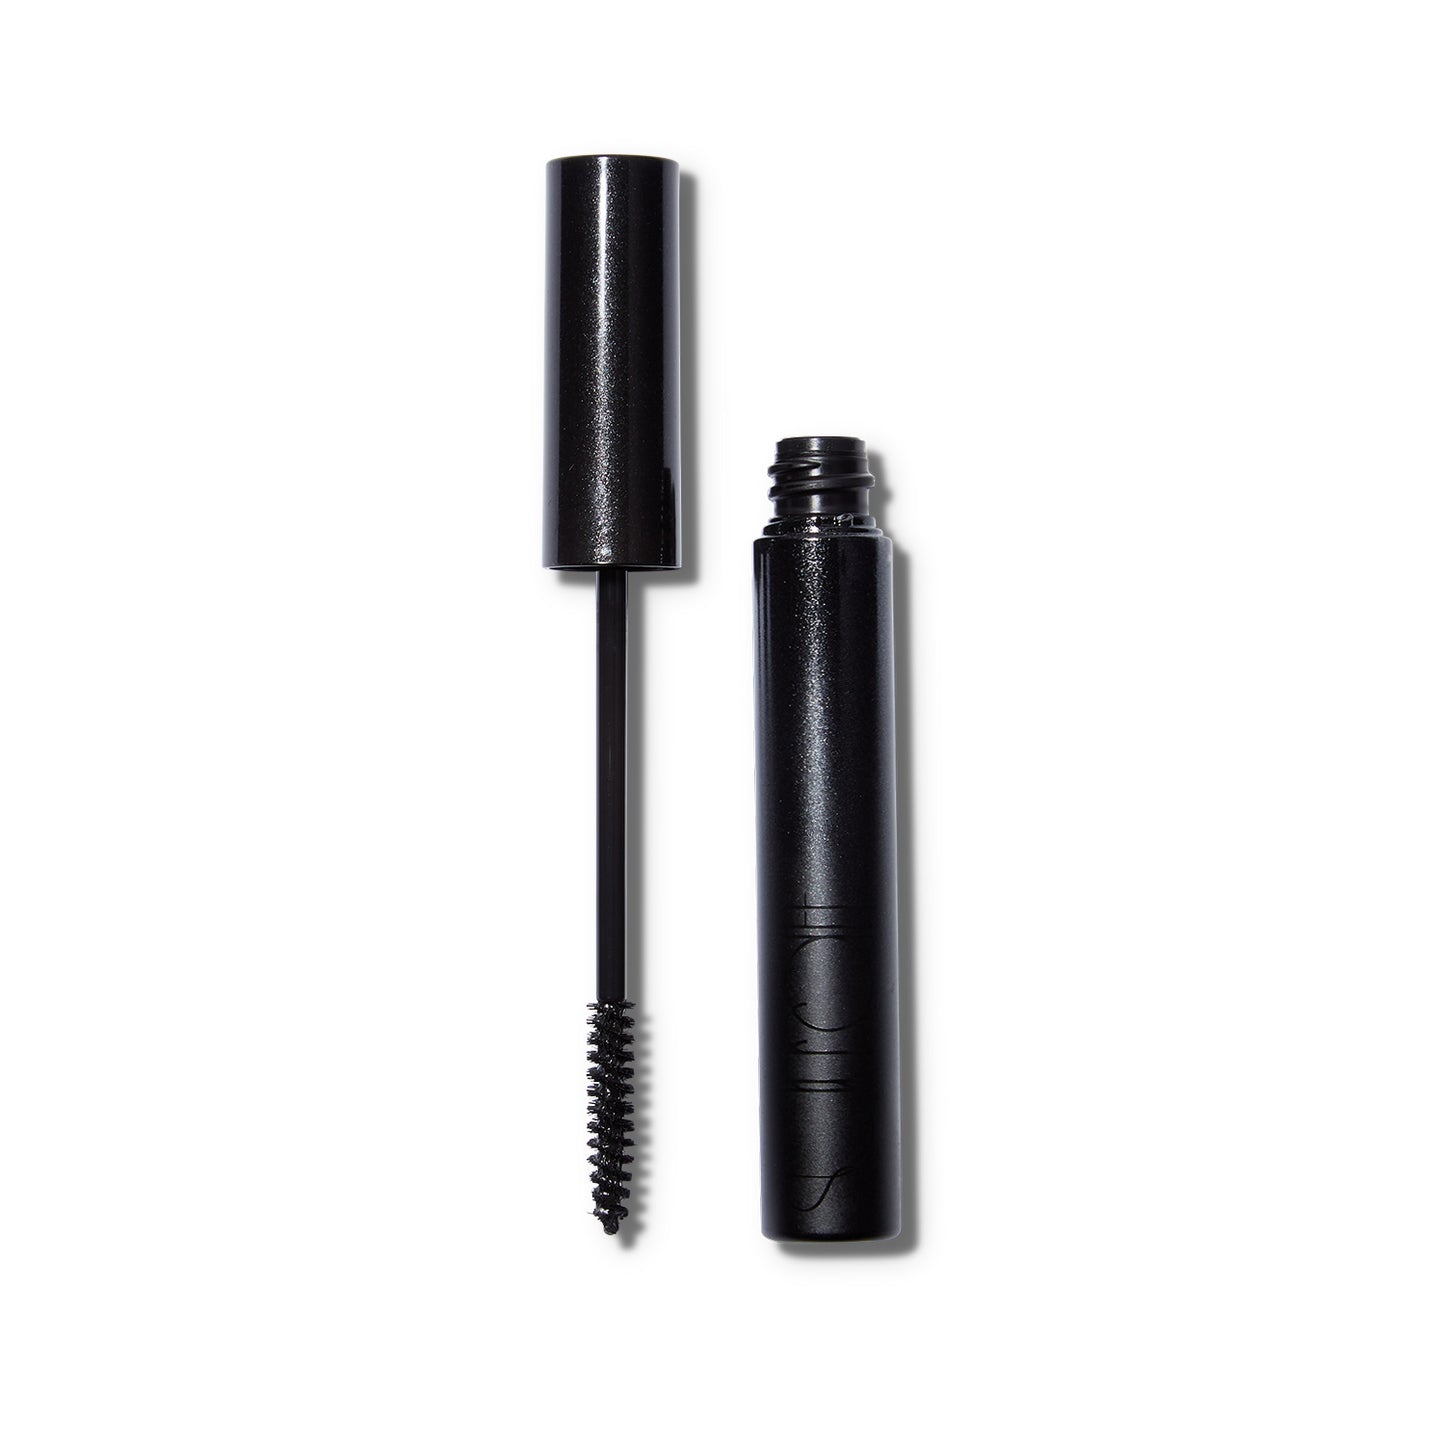 The wand of the Surratt Relevee Mascara is to the left of the open component.